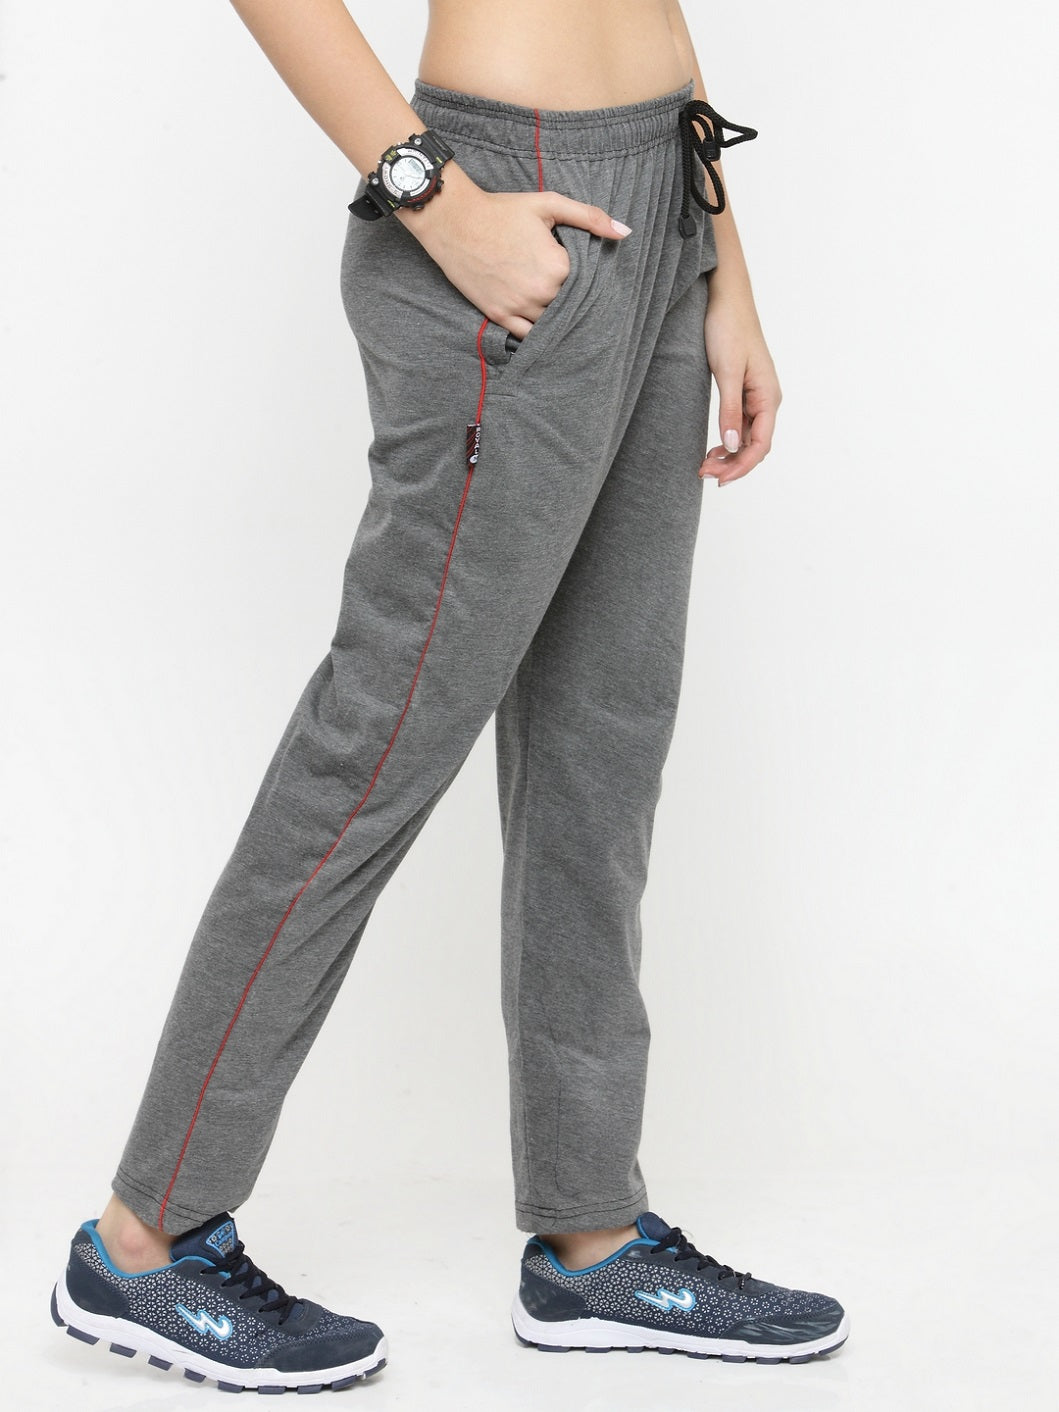 Uzarus Women's Cotton Track Pants With 2 Zippered Pockets